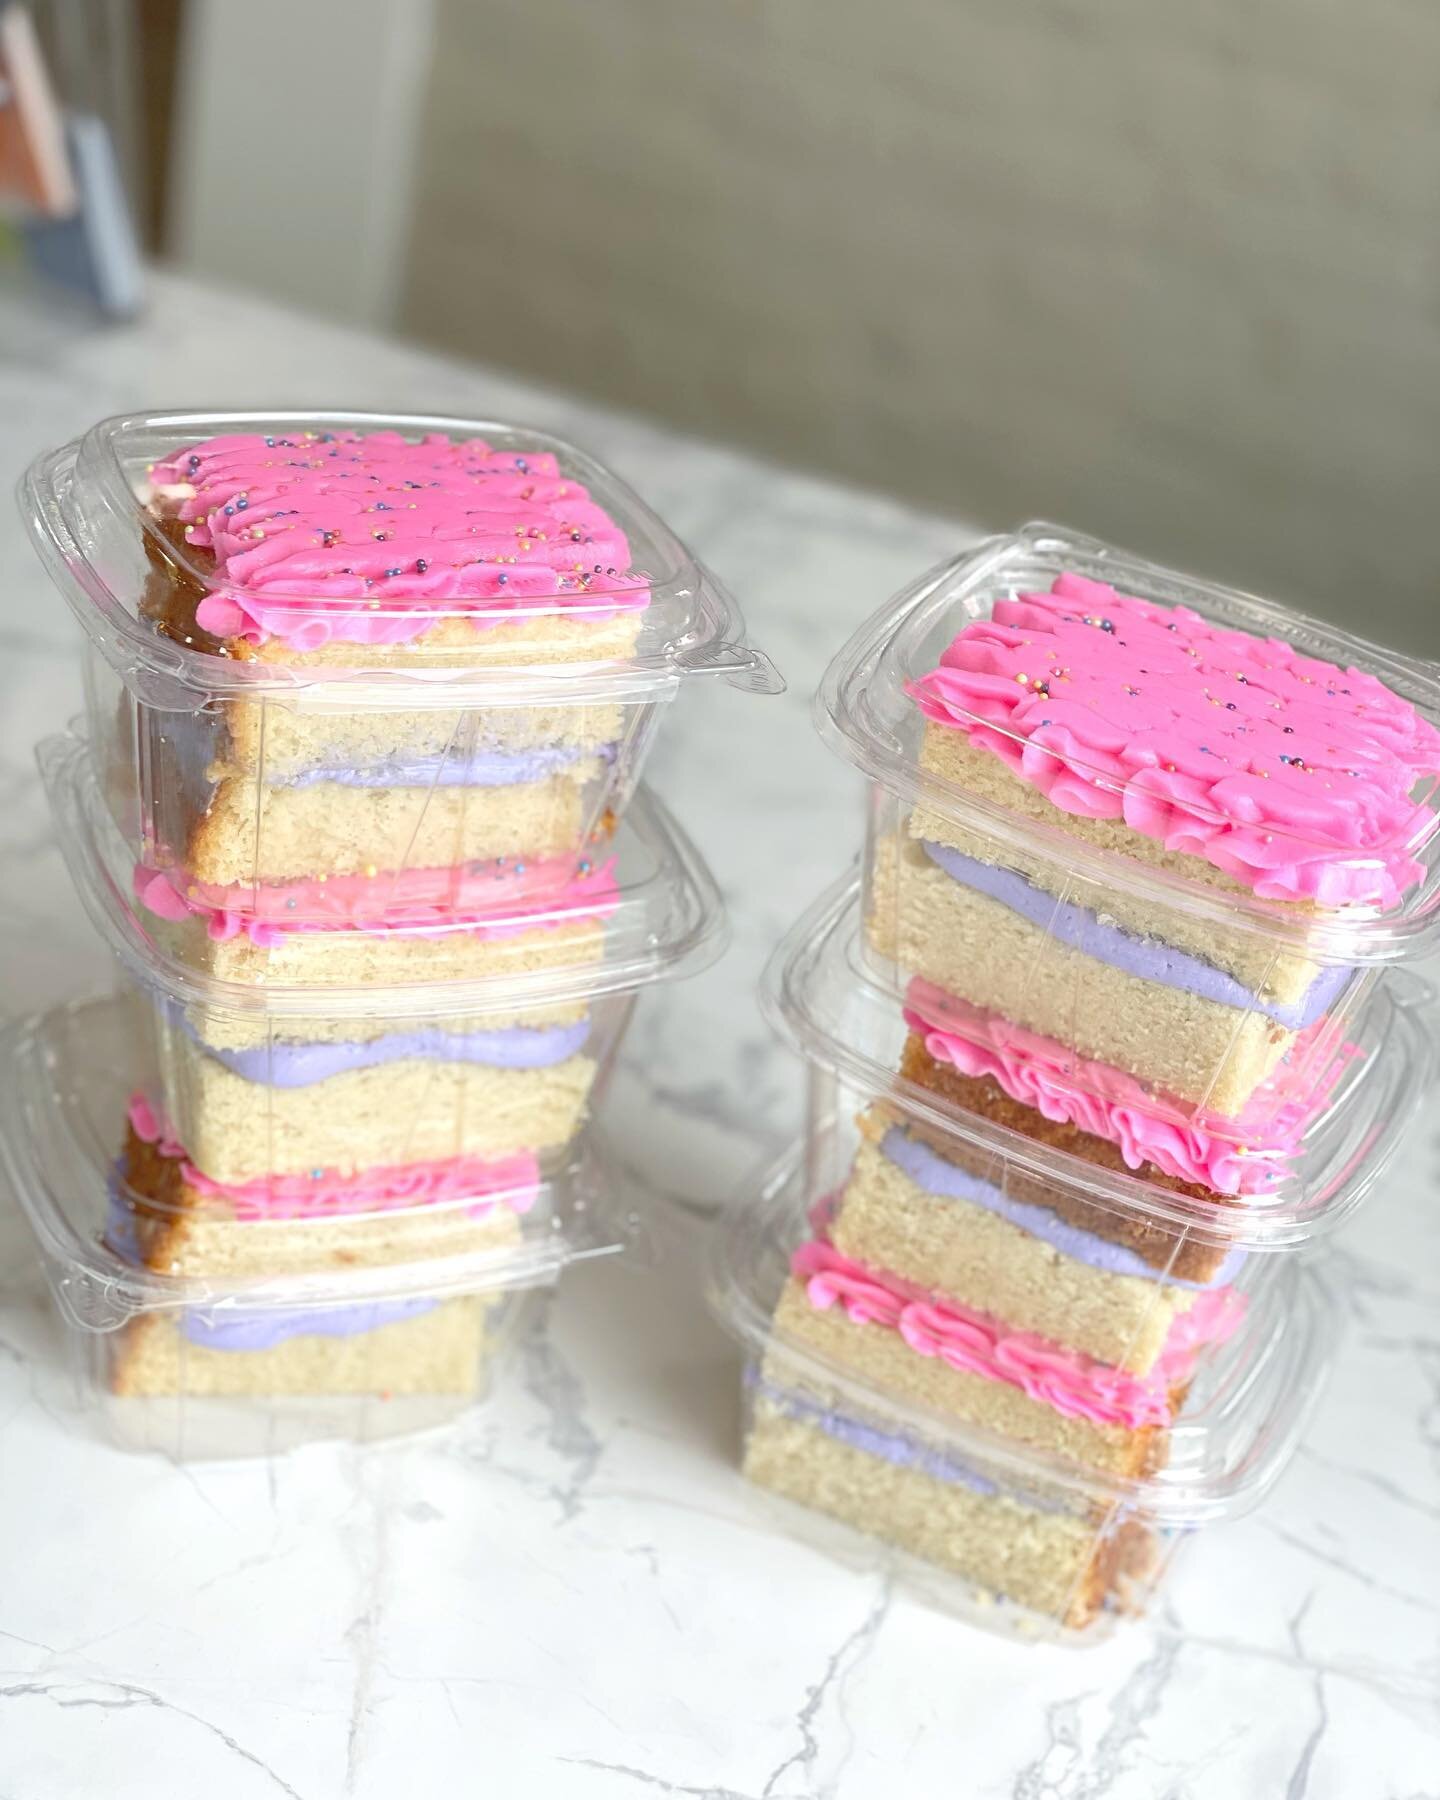 Jumbo Vanilla Cake slices are available in store today. We will be open until 8pm tonight enjoying the @caleramainstreet Eggstravaganza tonight. Bring the family&hellip;you&rsquo;re in for a treat! 
.
.

.
📣Did you know we have a beautiful event spa